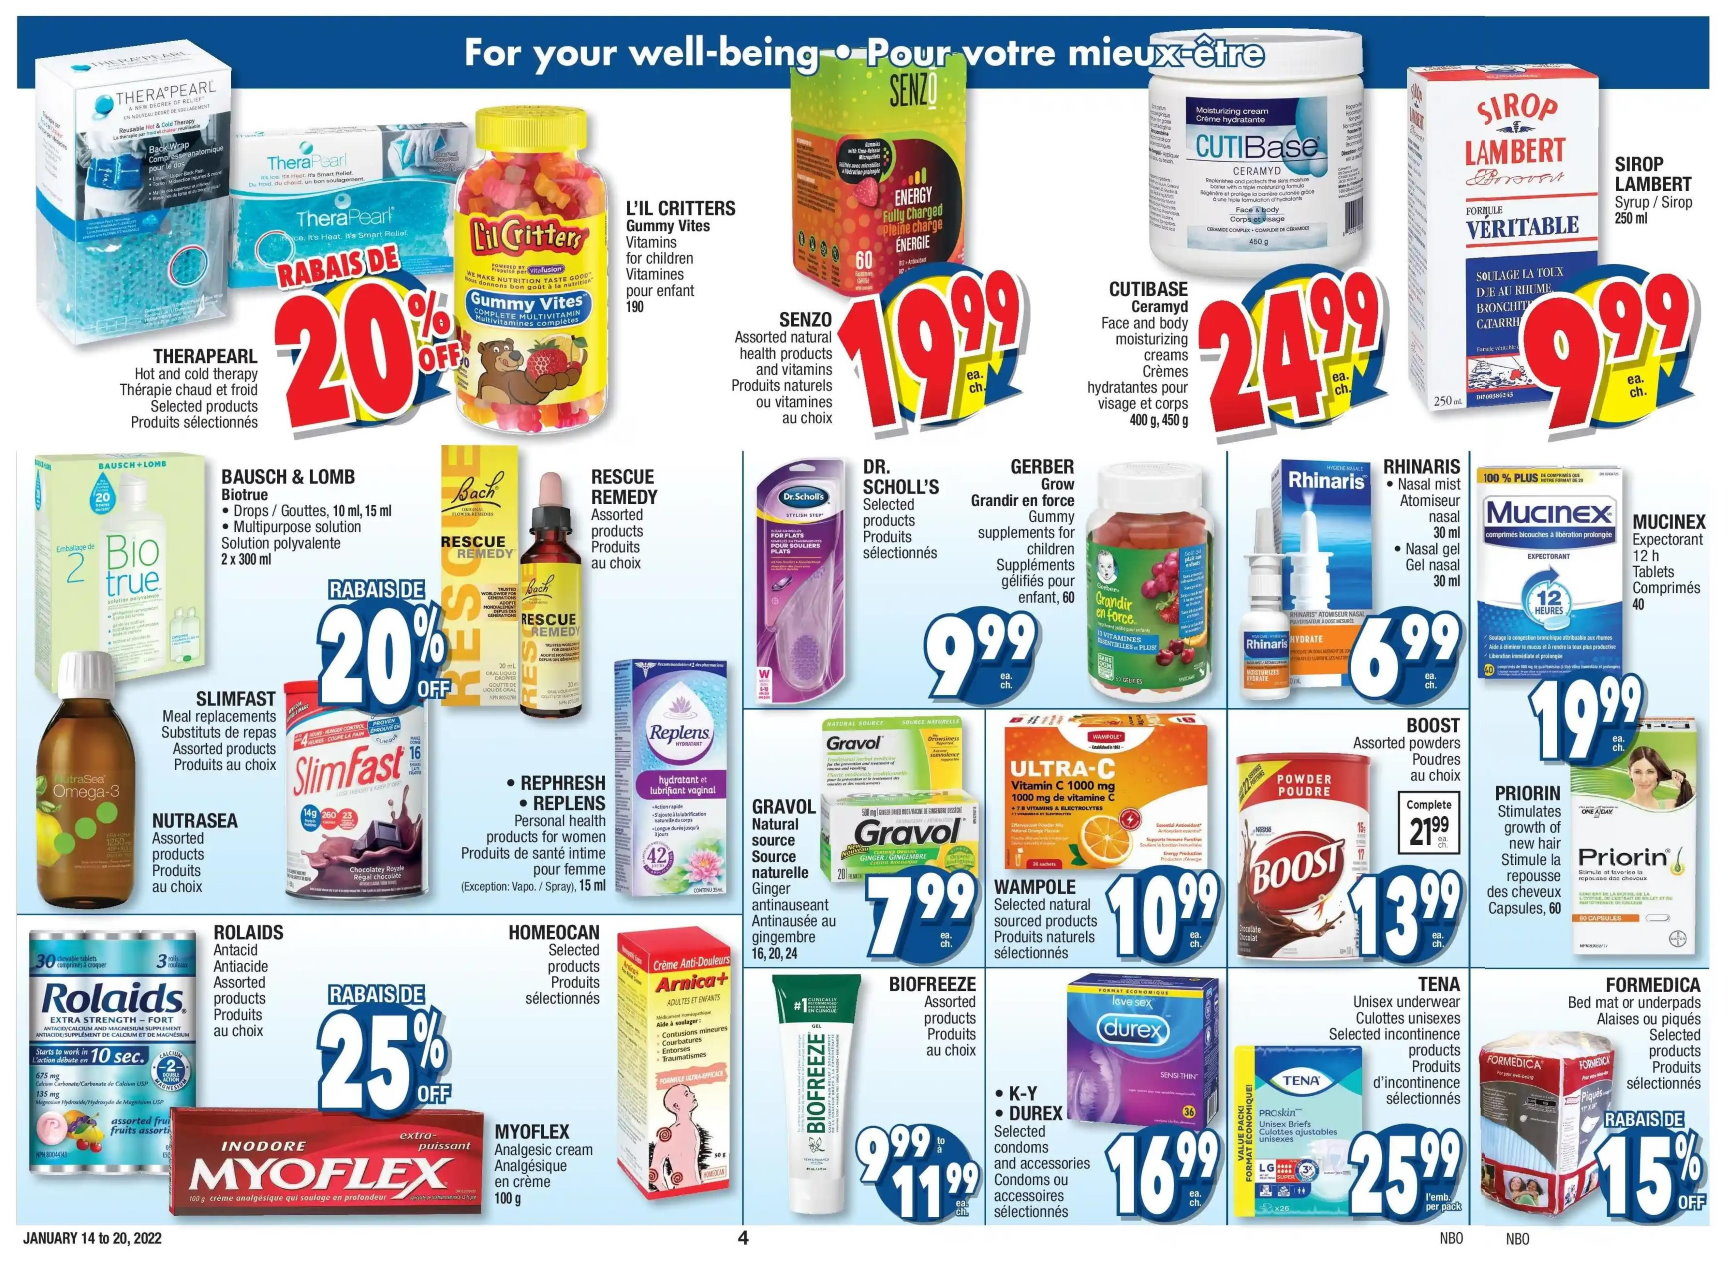 Jean Coutu - Even More Savings - Weekly Flyer Specials - Page 4